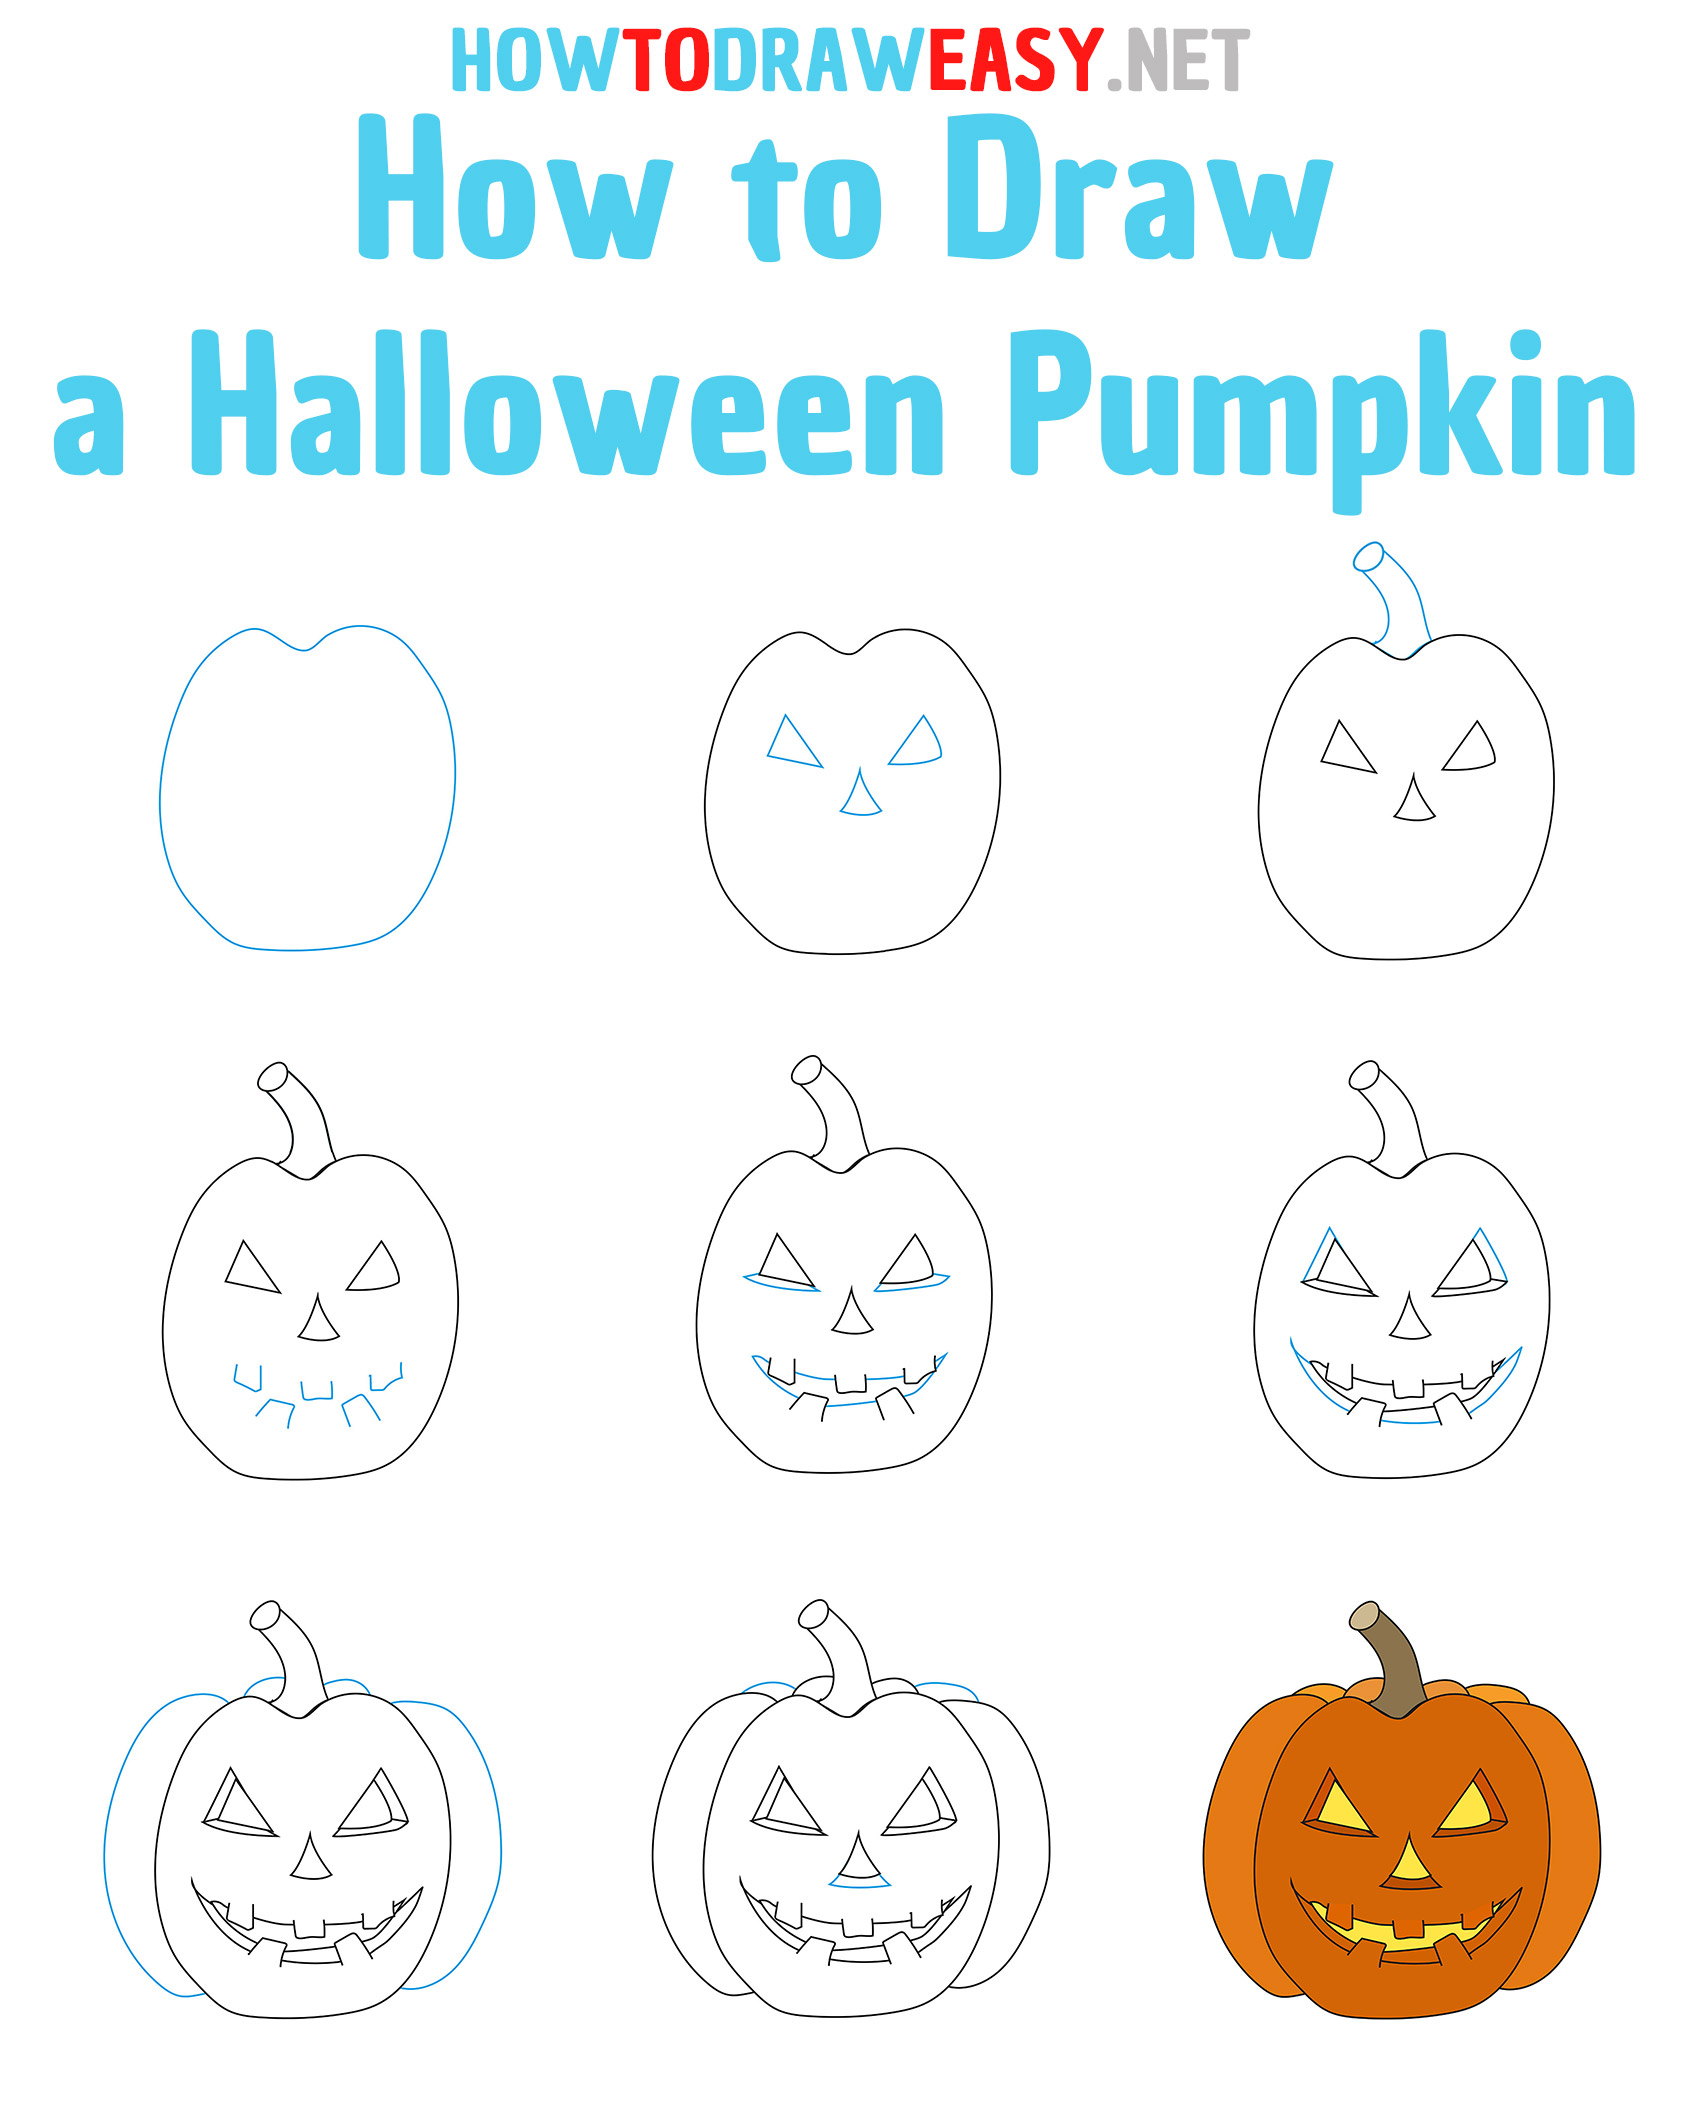 How to Draw a Halloween Pumpkin Step by Step